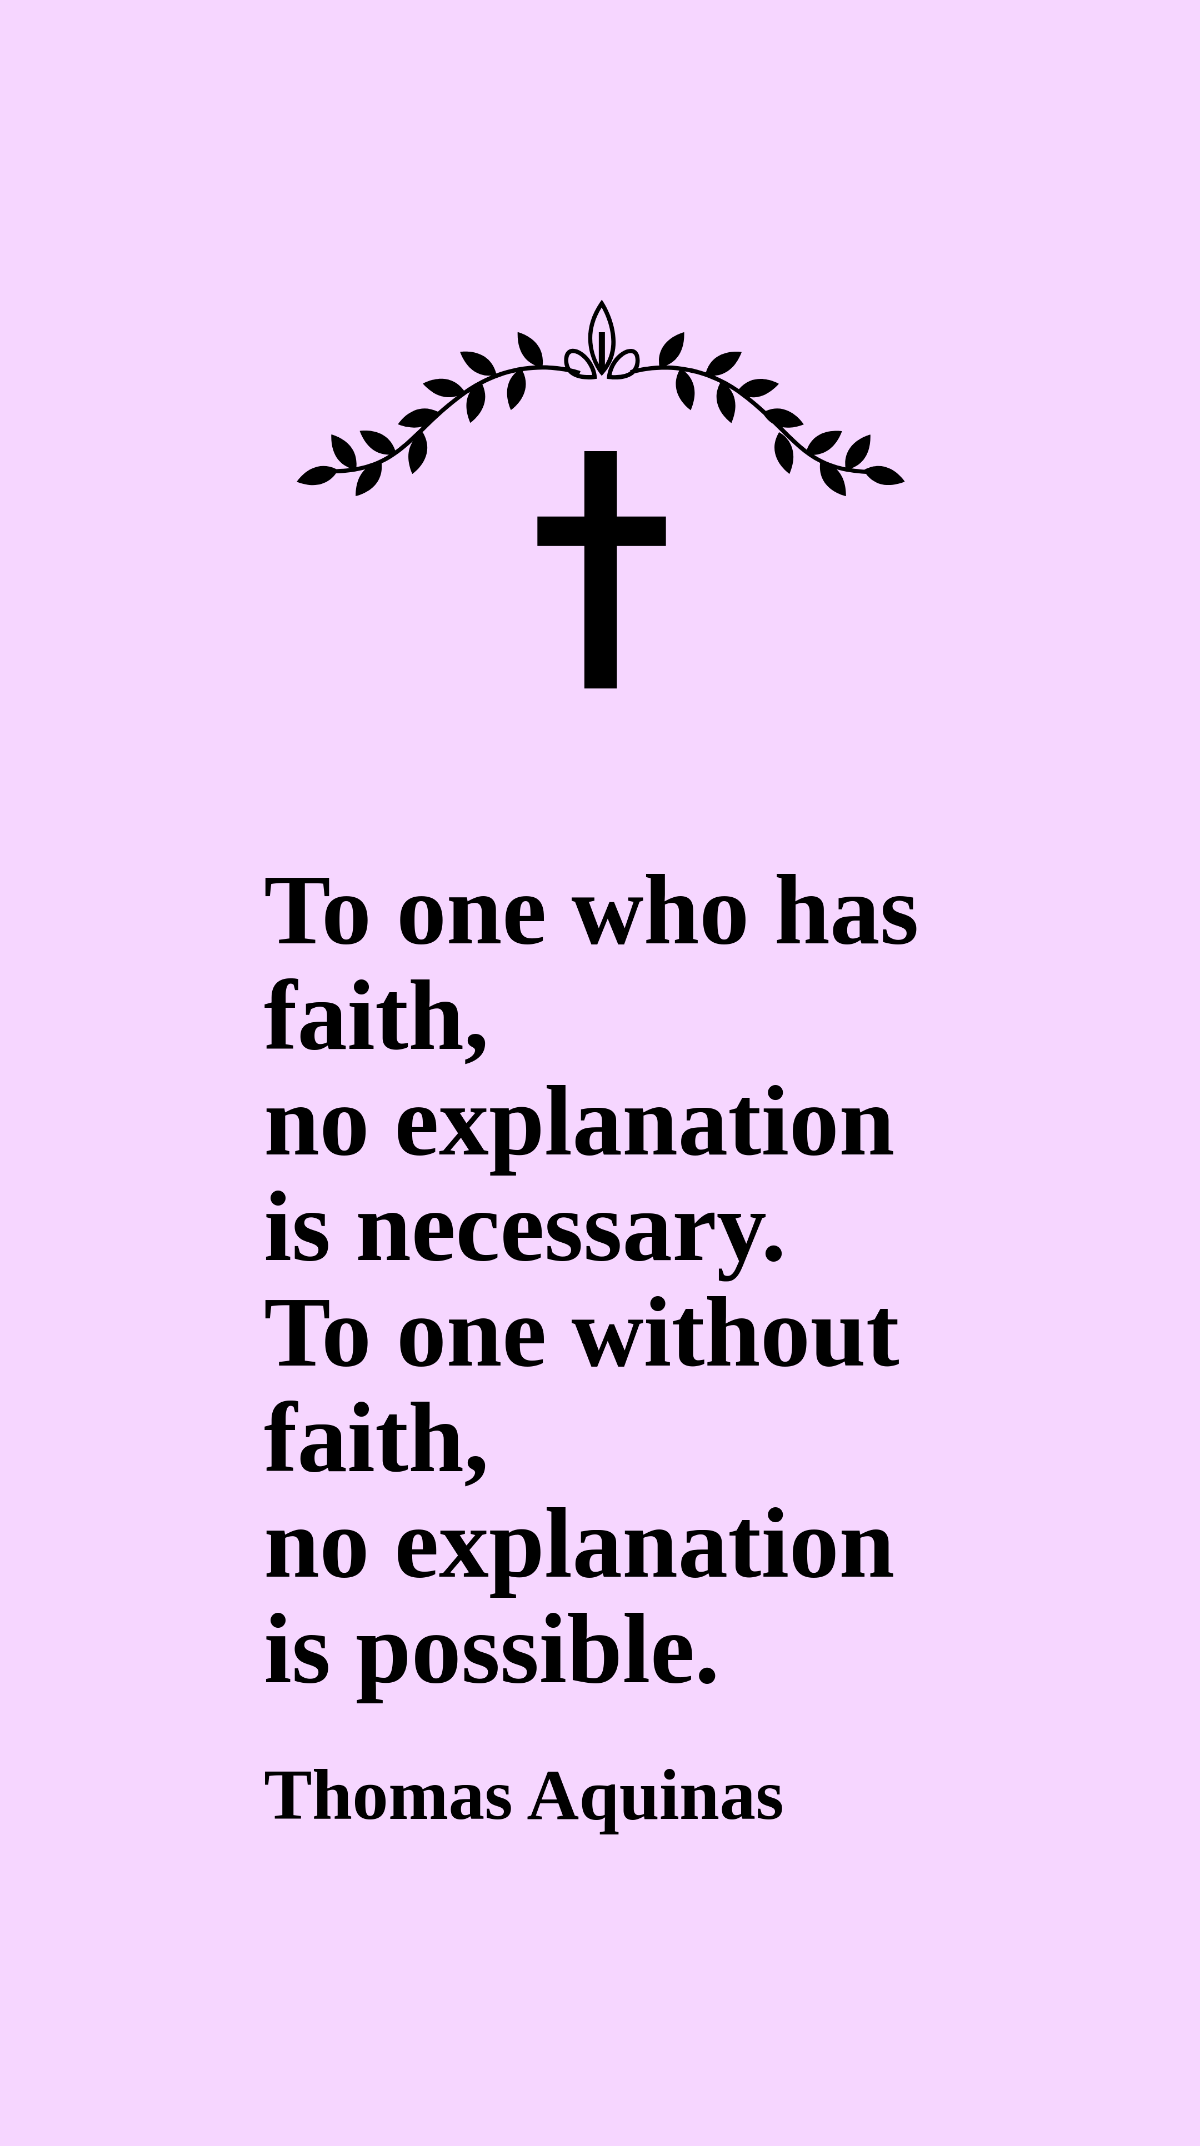 Thomas Aquinas - To one who has faith, no explanation is necessary. To one without faith, no explanation is possible.